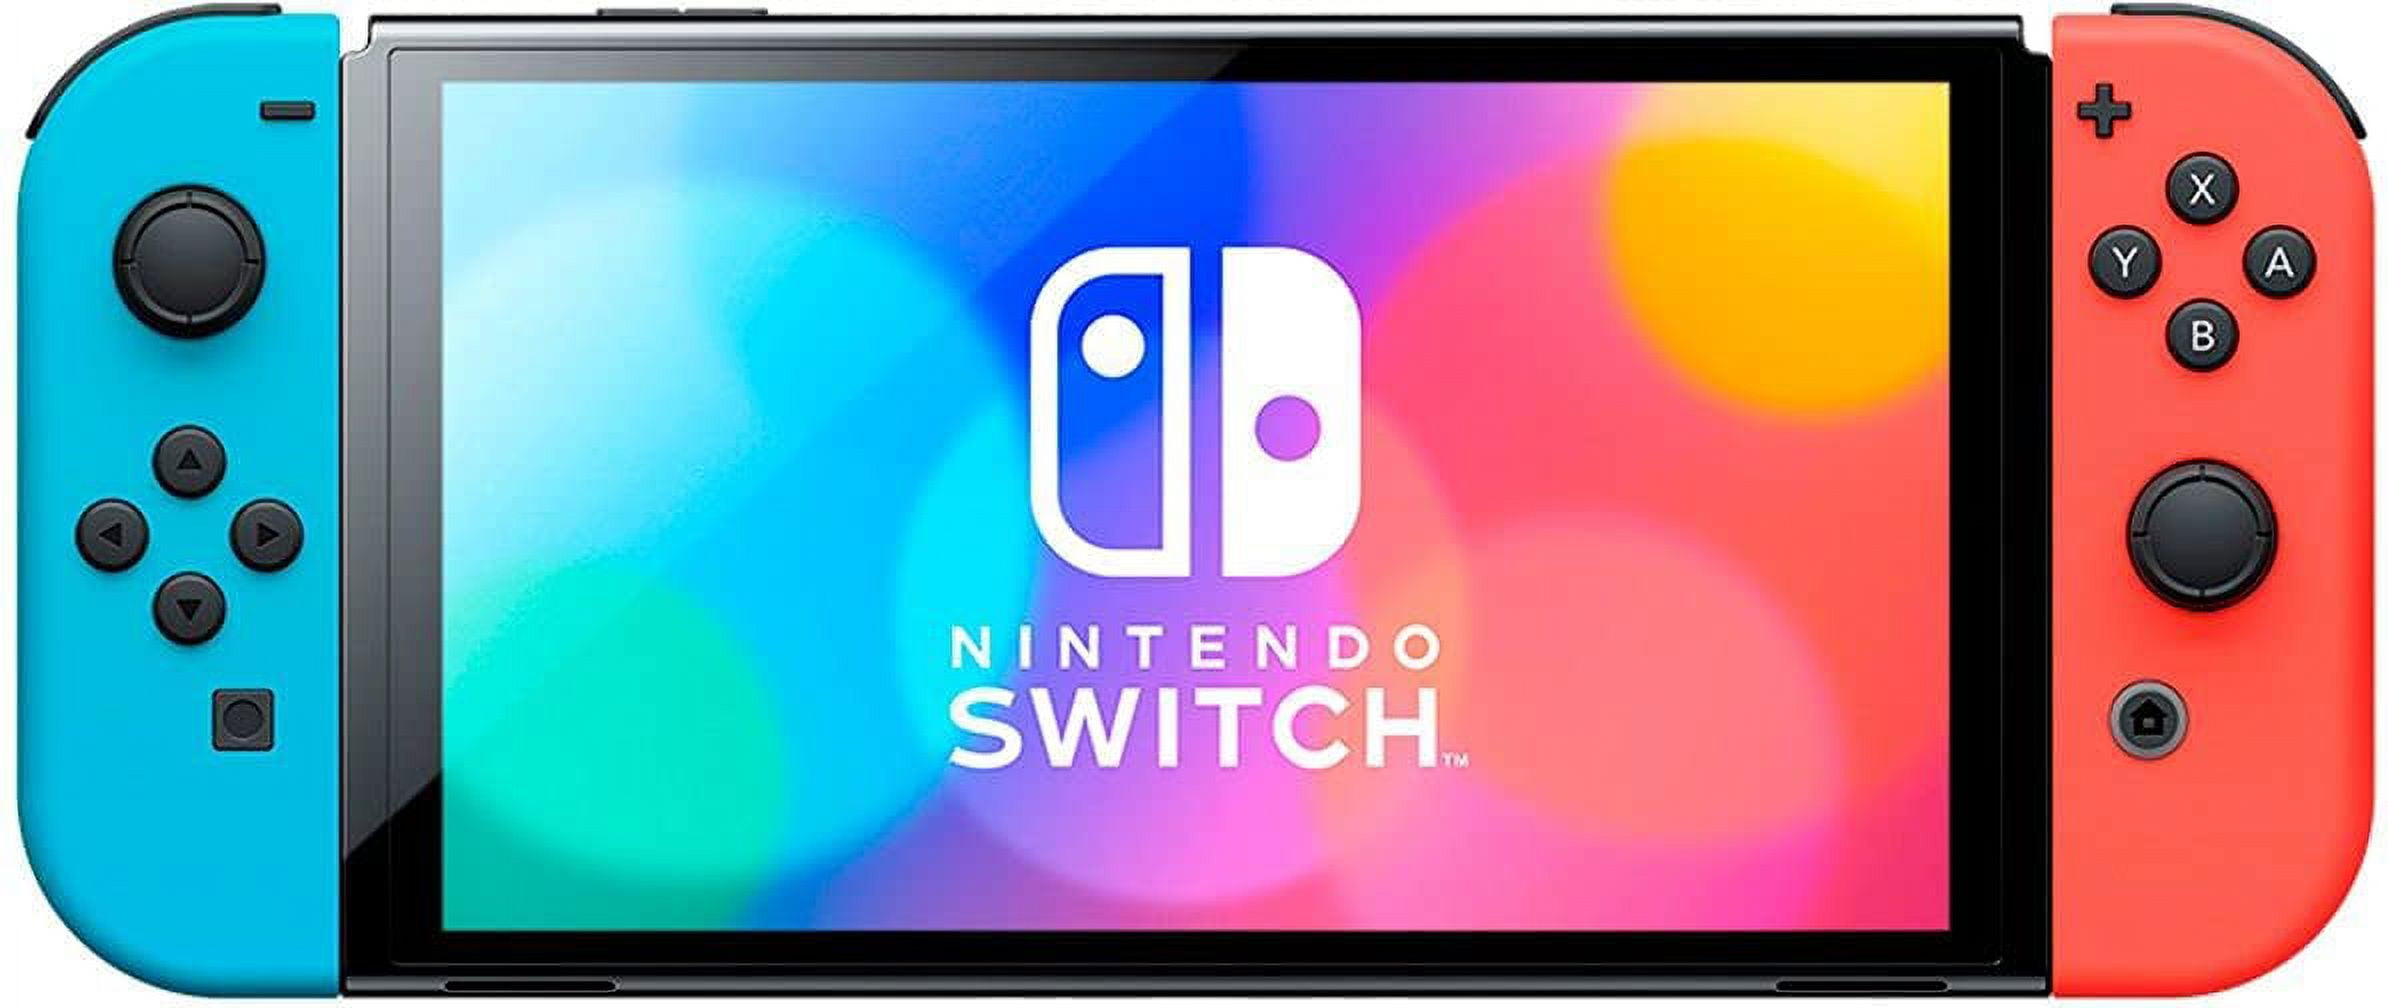 Nintendo Switch OLED Console - White + Joy-Con (L-R) - Neon Red/Neon Blue +  Super Mario Party - Curacao 